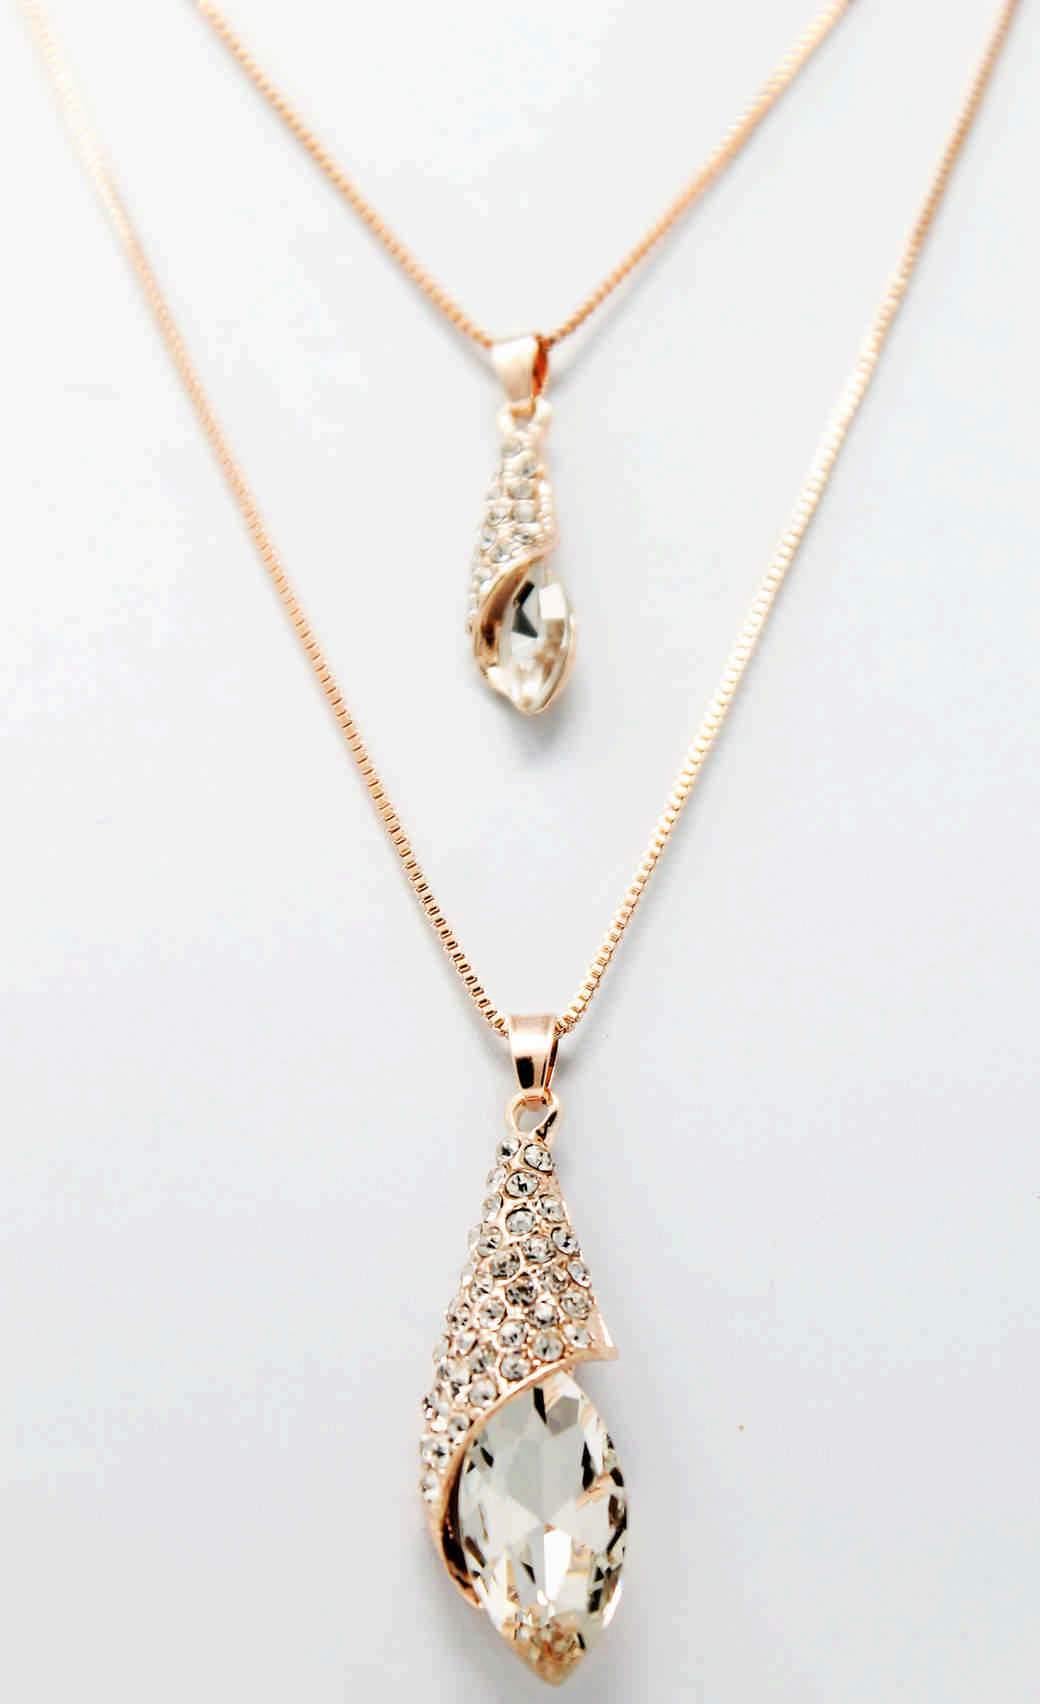 Drop Style Rhinestones Studded Design Imitation Fashion Metal Double Pendant with Long Chain, Gold